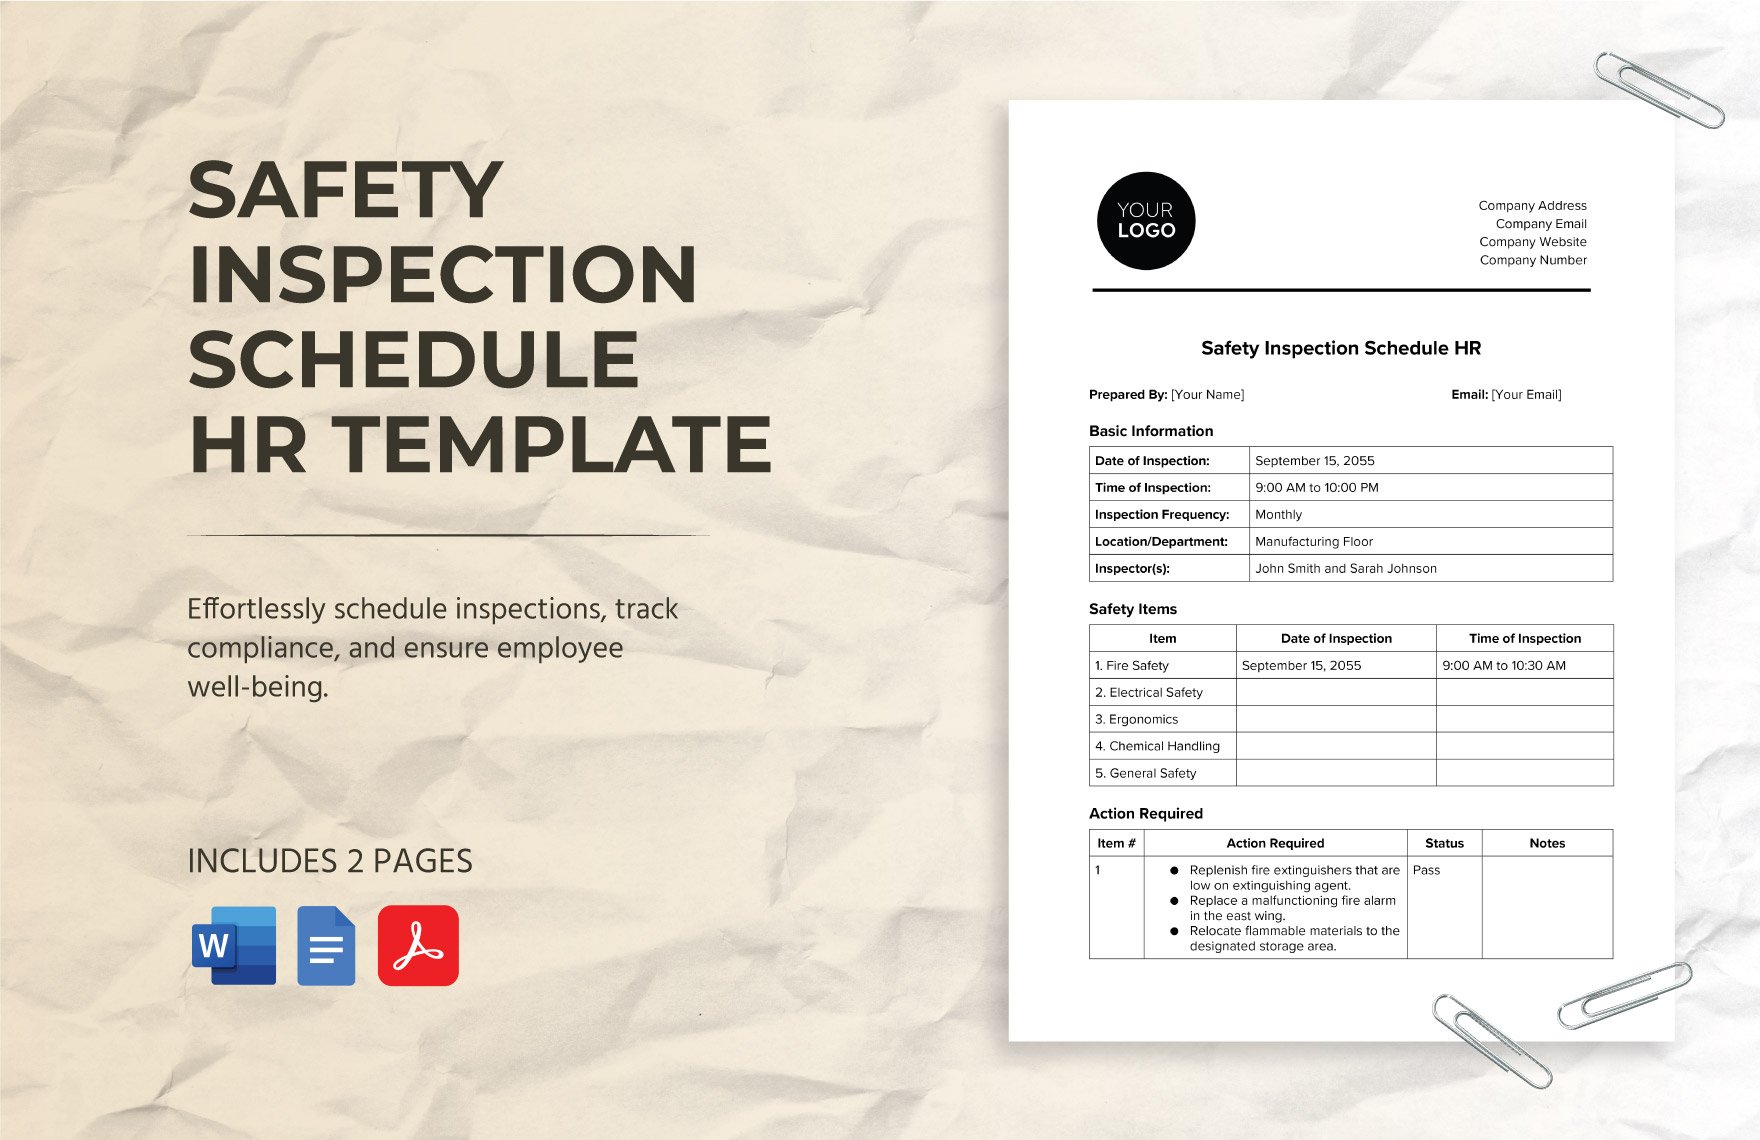 Safety Inspection Schedule HR Template in Word, Google Docs, PDF